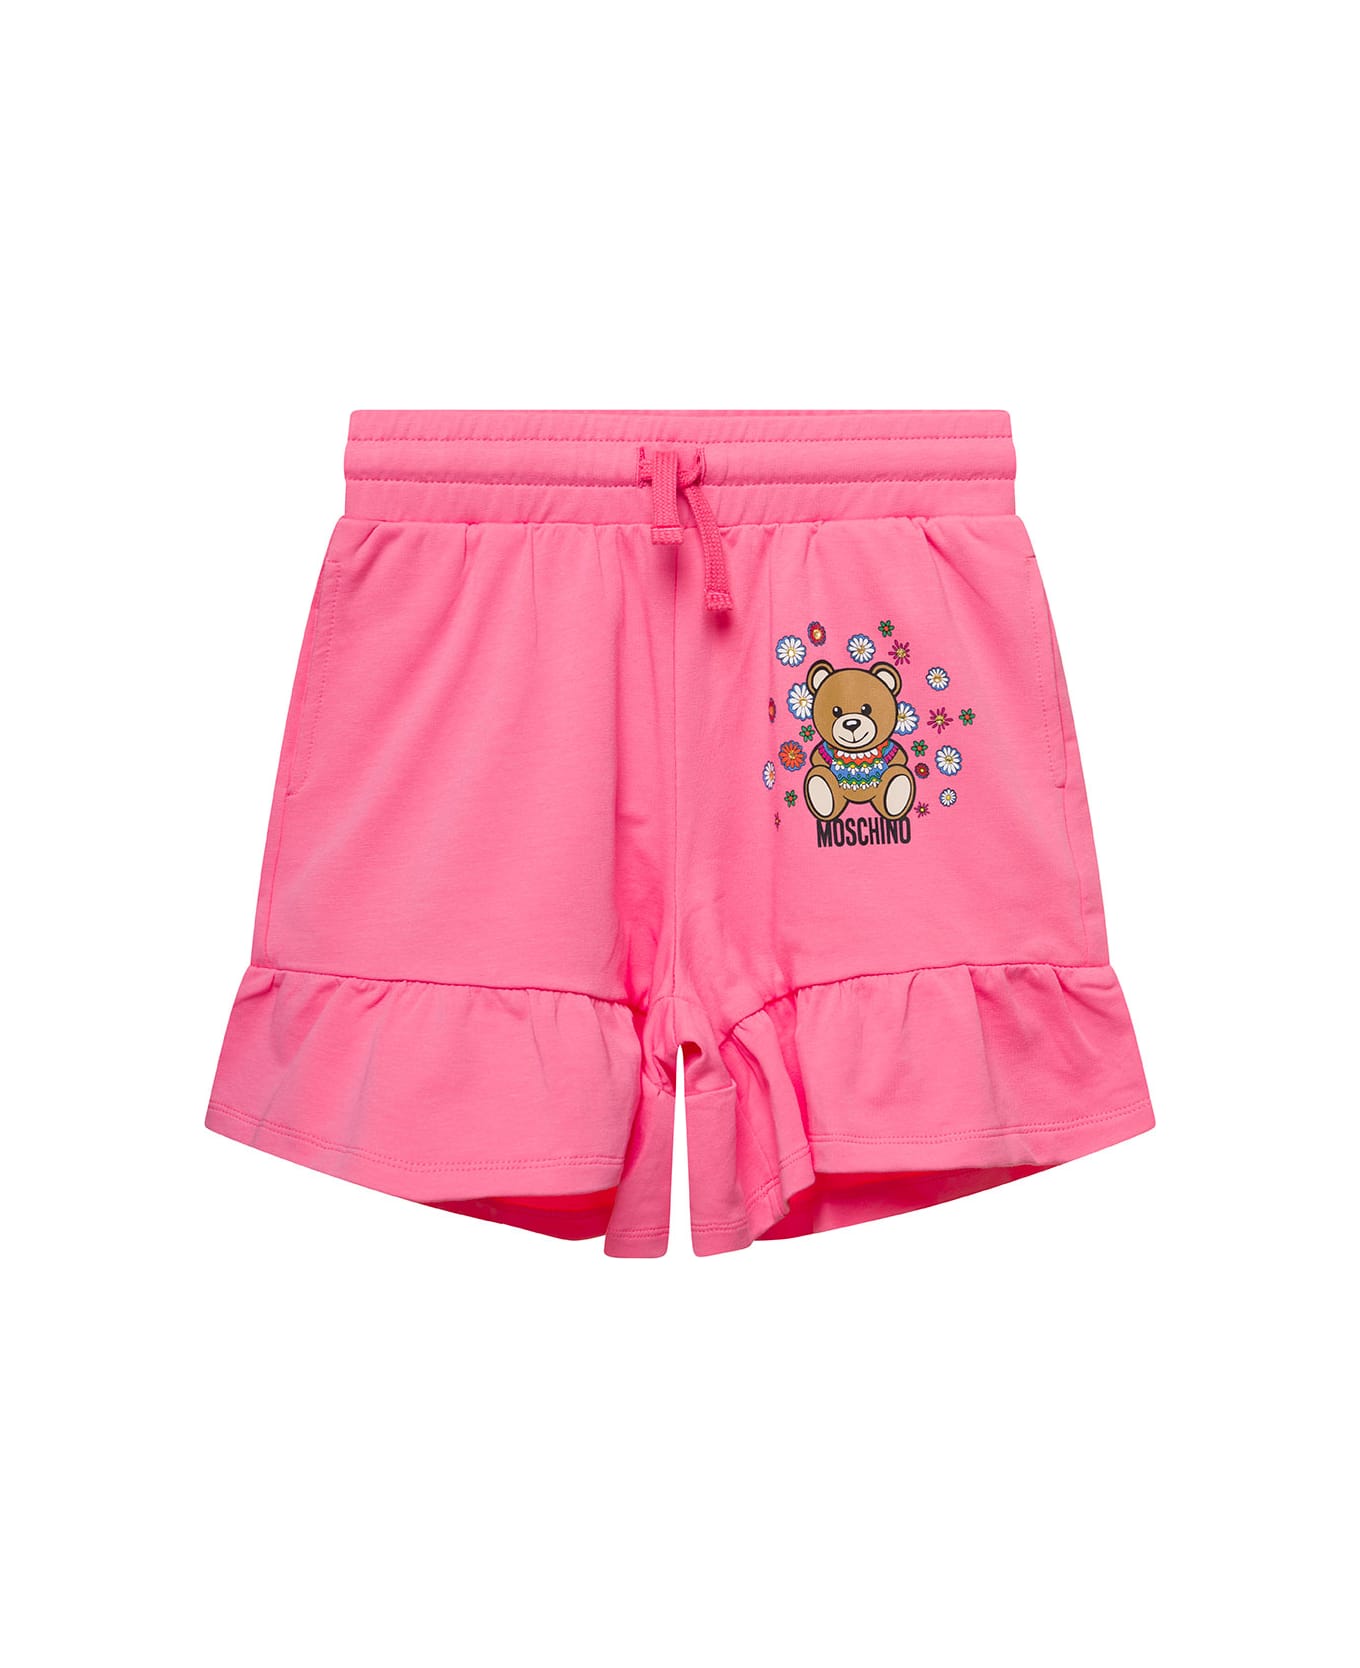 Moschino Pink Shorts With Teddy Bear Print And Frill Trim In Stretch Cotton Girl - Pink